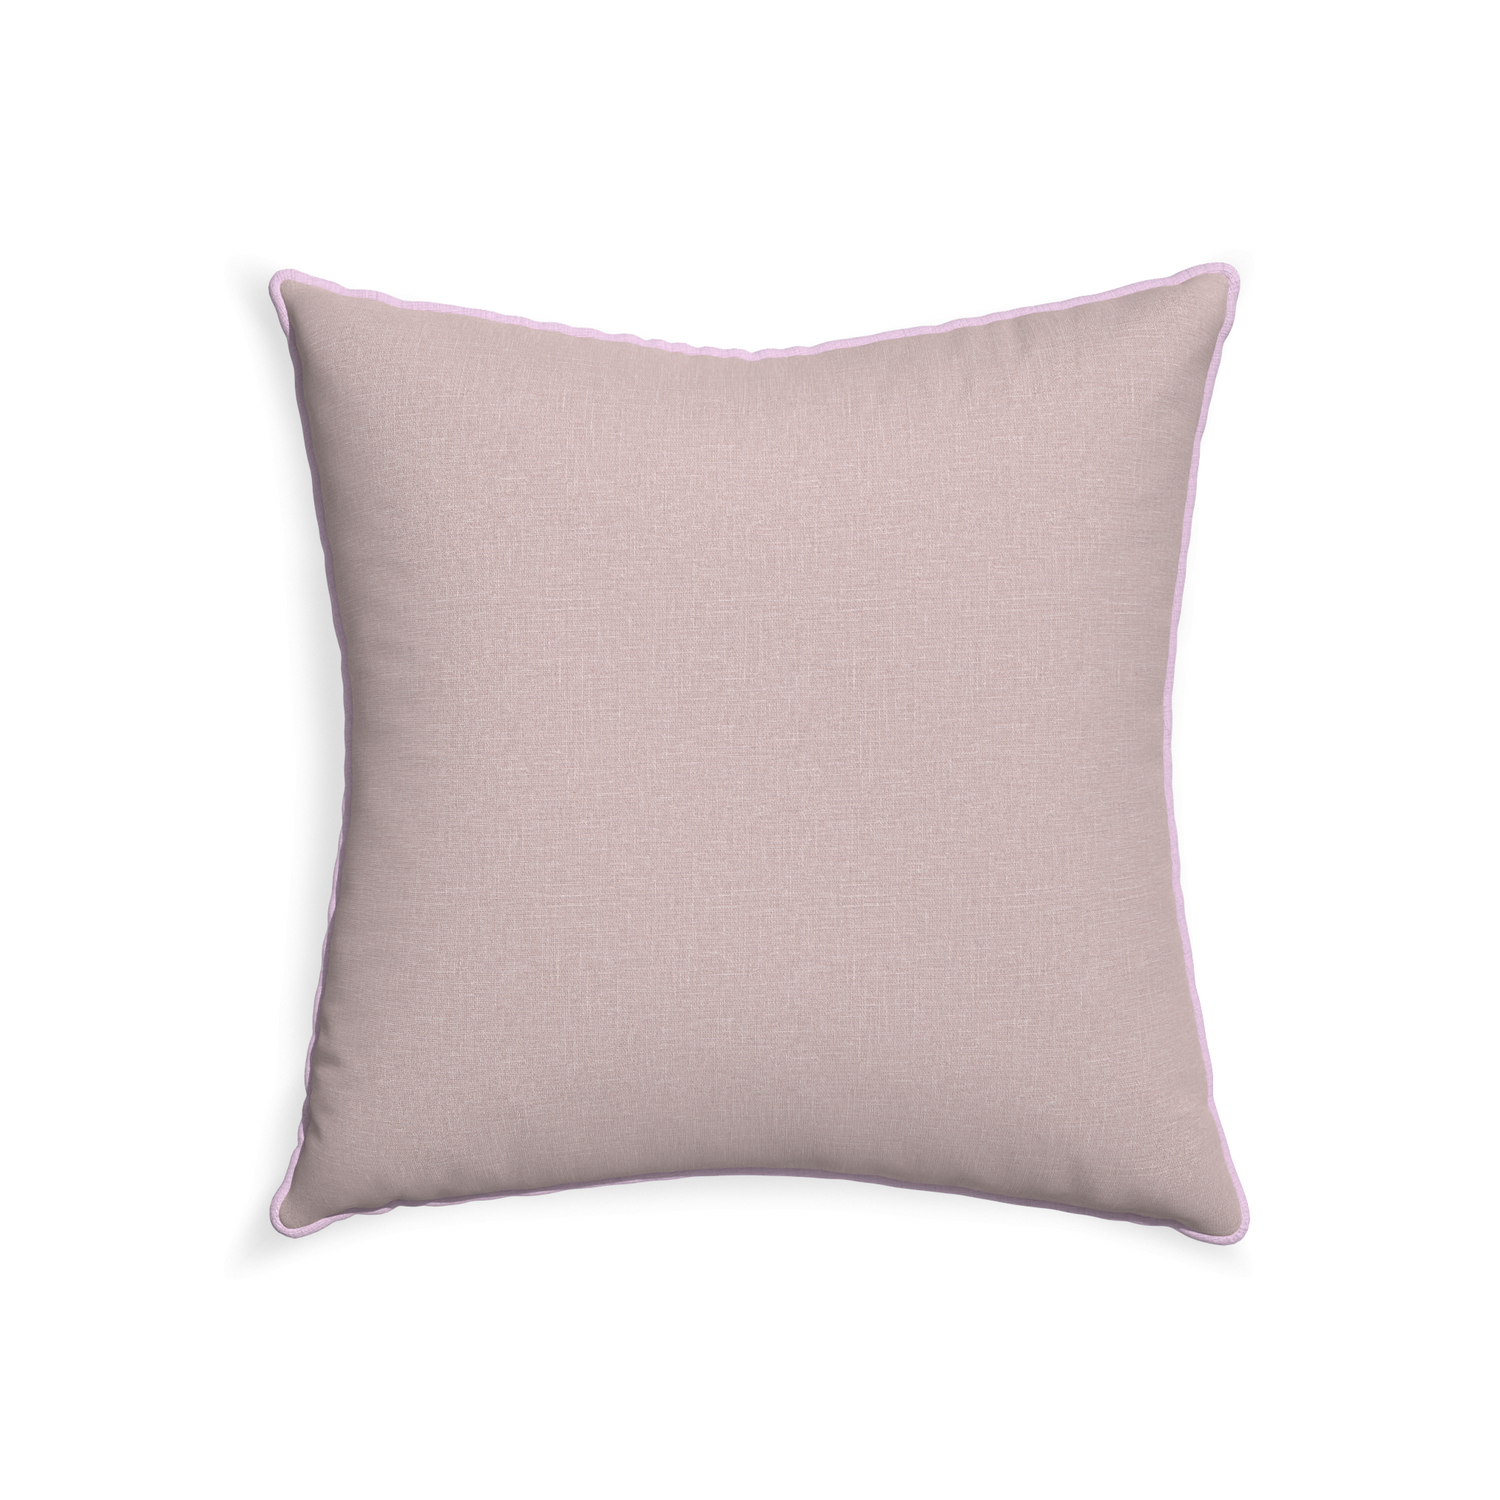 22-square orchid custom mauve pinkpillow with l piping on white background